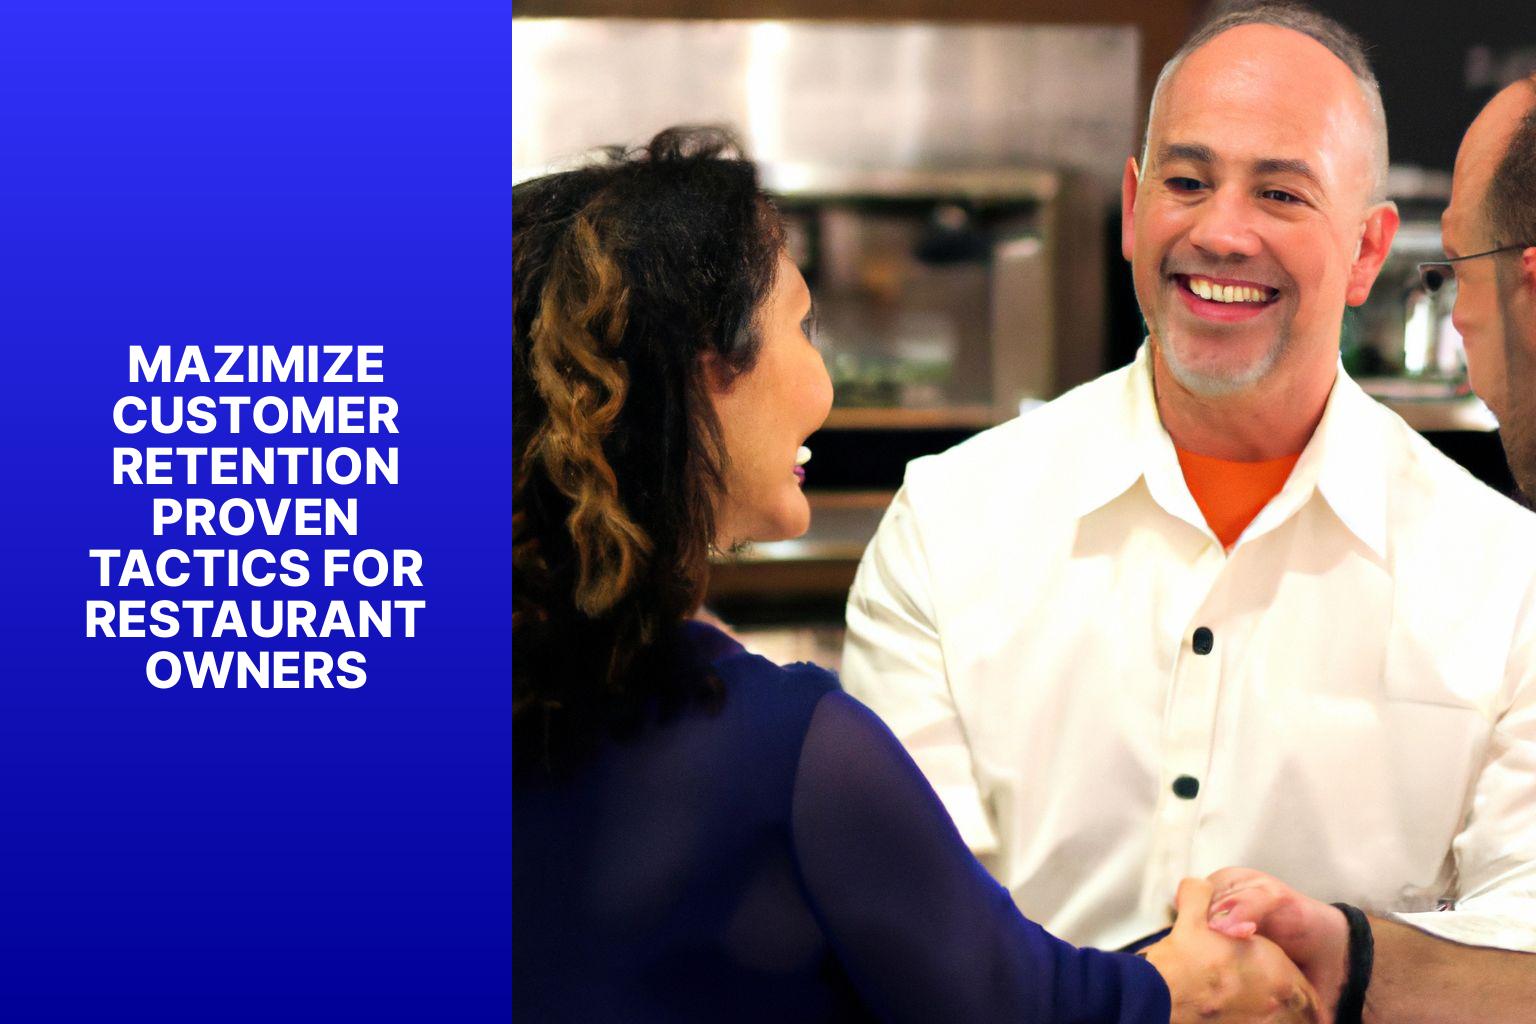 Mazimize Customer Retention Proven Tactics for Restaurant Owners